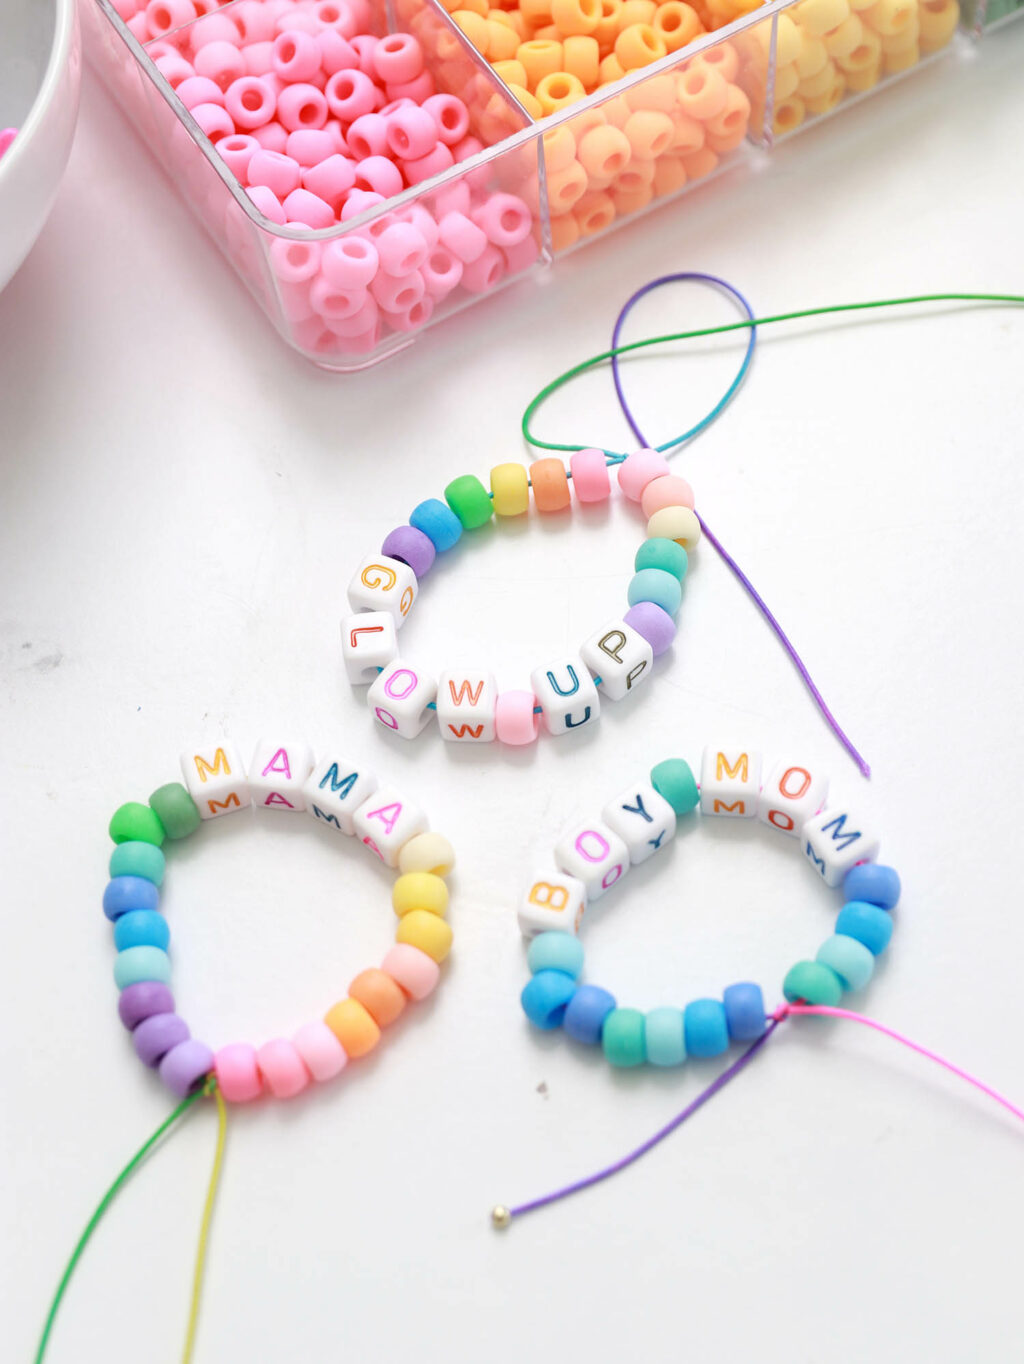 Glow In The Dark Elastic Name Customized Bracelets Personlized For Kids  Girls Women With Plastic Pearl Beads White at Rs 199.00 | Colorful Beaded  Bracelet, Fashion Beaded Bracelet, Beads Bracelet, बीडेड ब्रेसलेट -